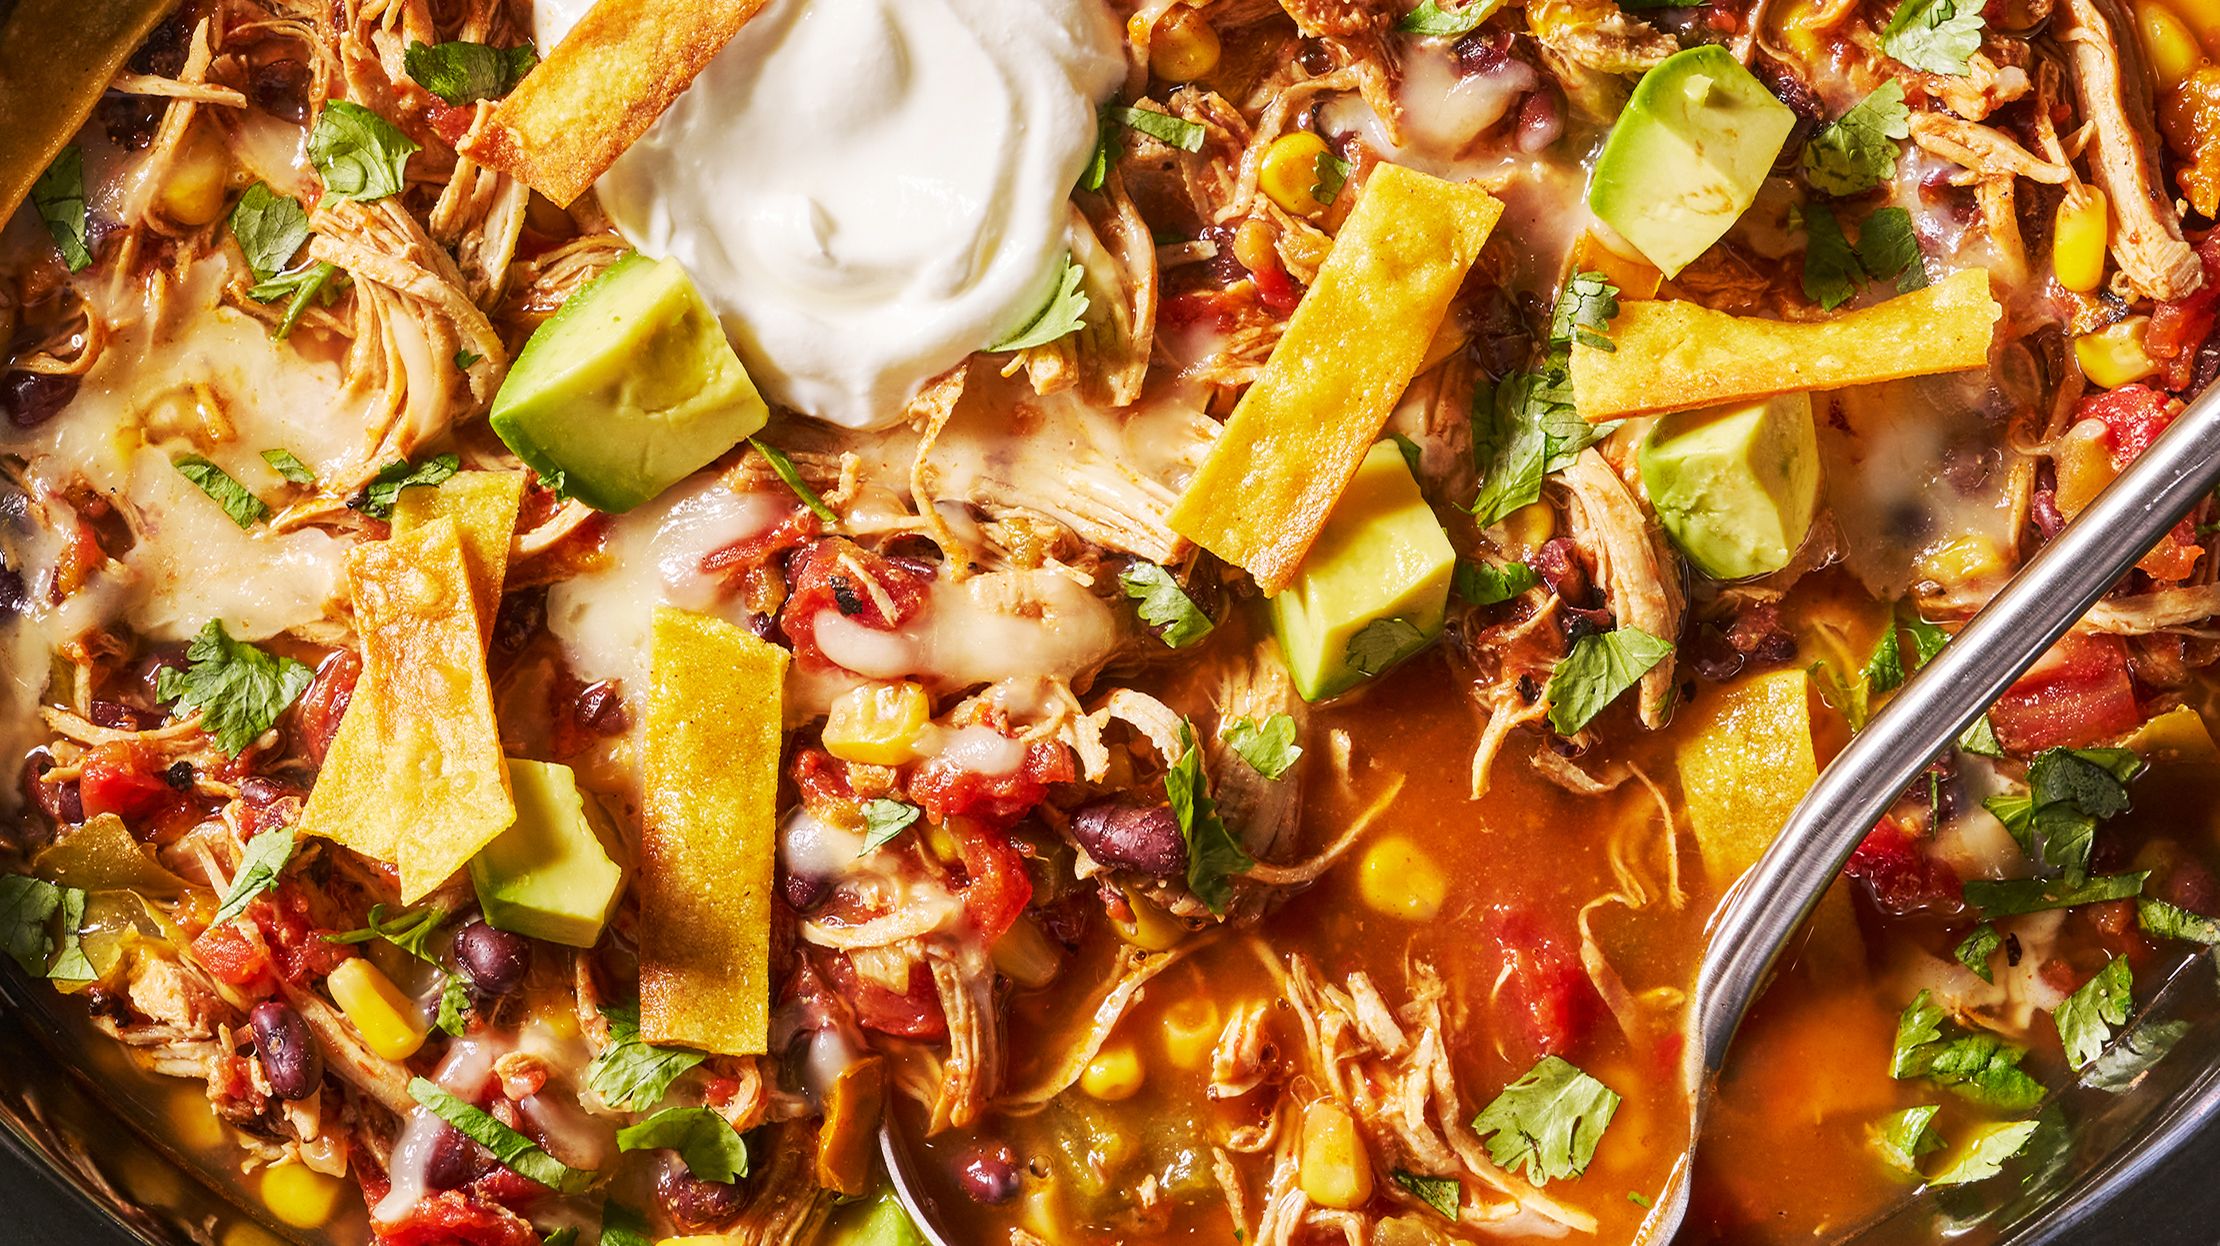 Easy Crock Pot Chicken Tortilla Soup - Healthy and Flavorful